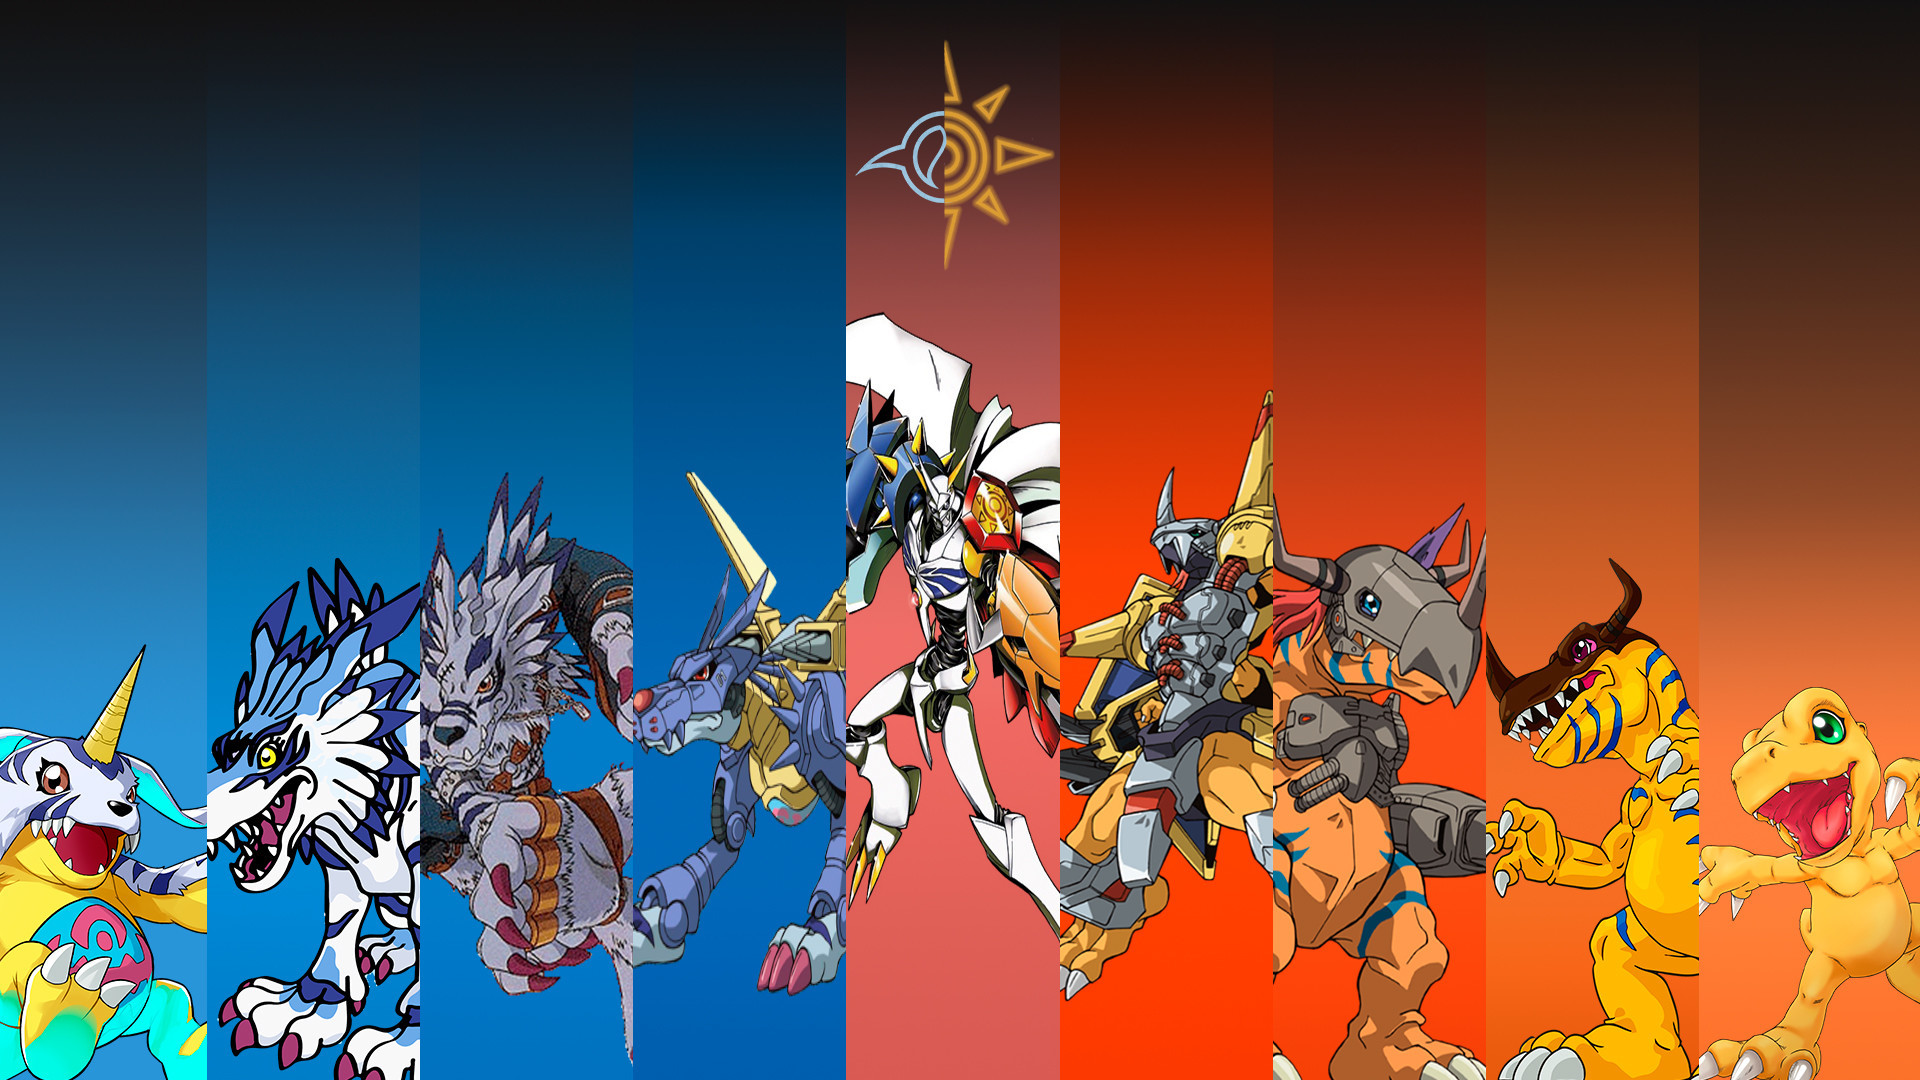 1920x1080 Wanted a Digimon wallpaper for my work computer, so I made one